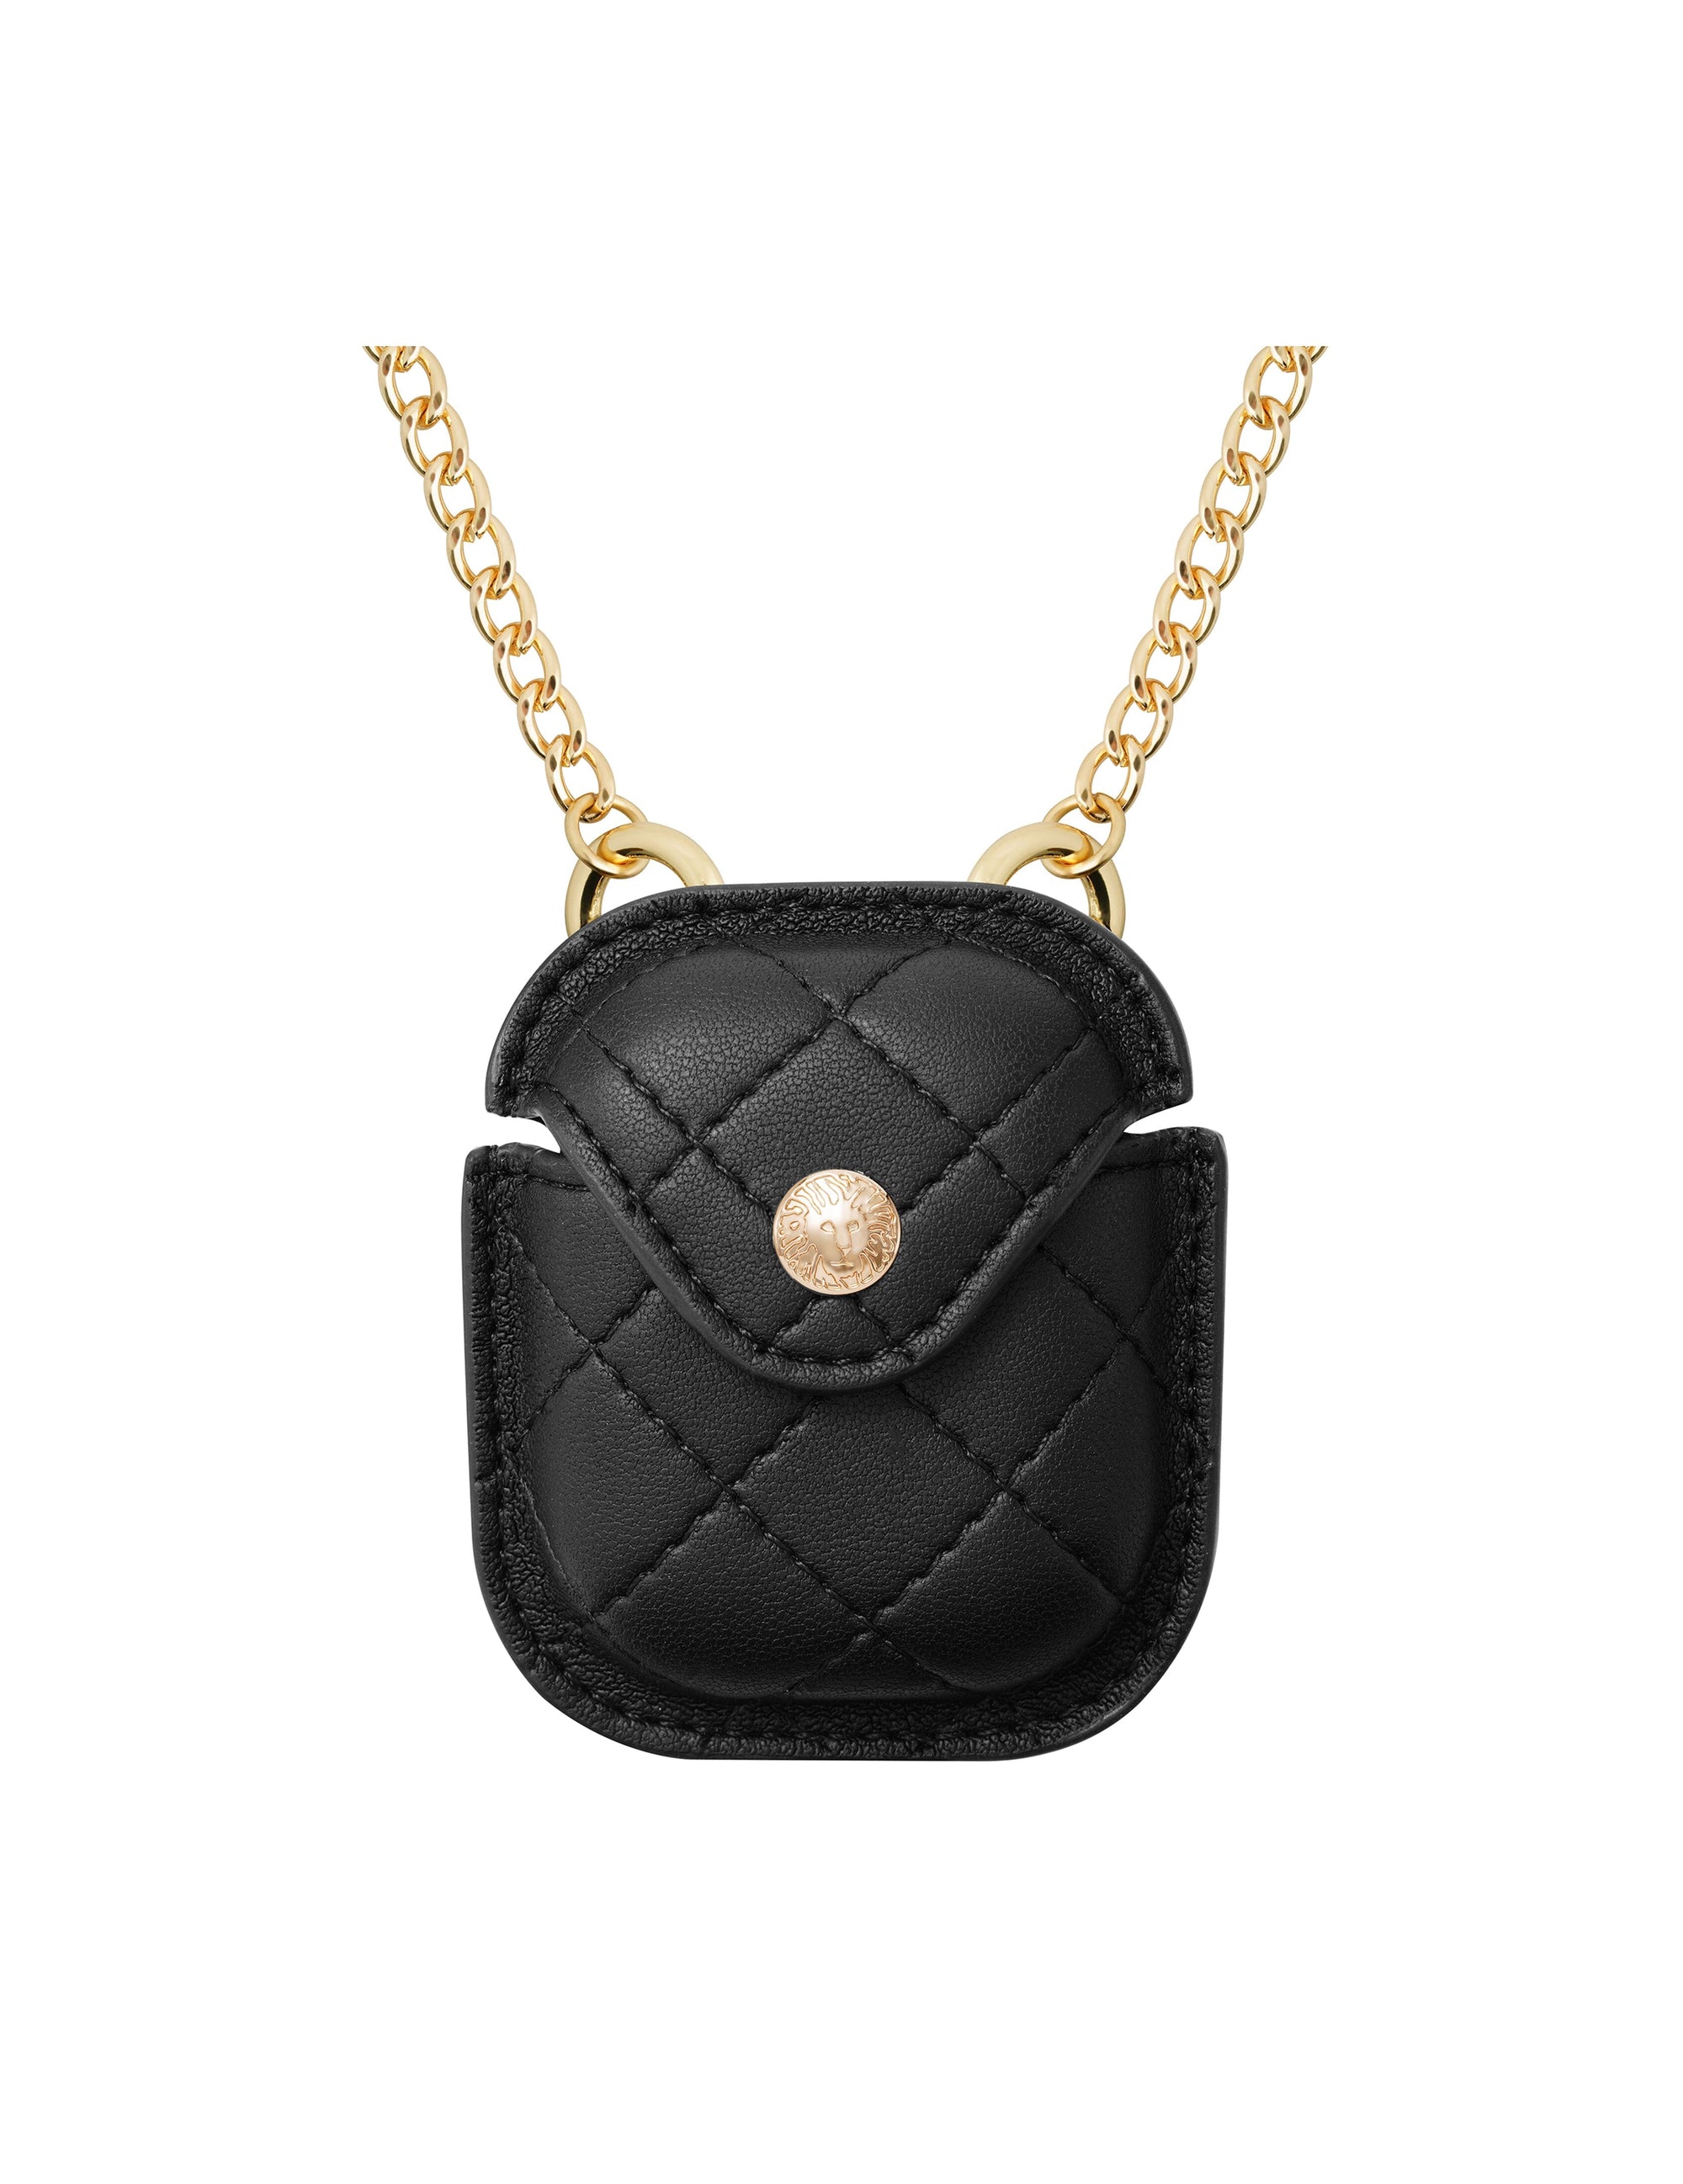 Quilted AirPods Case with Cross Body Chain | Anne Klein